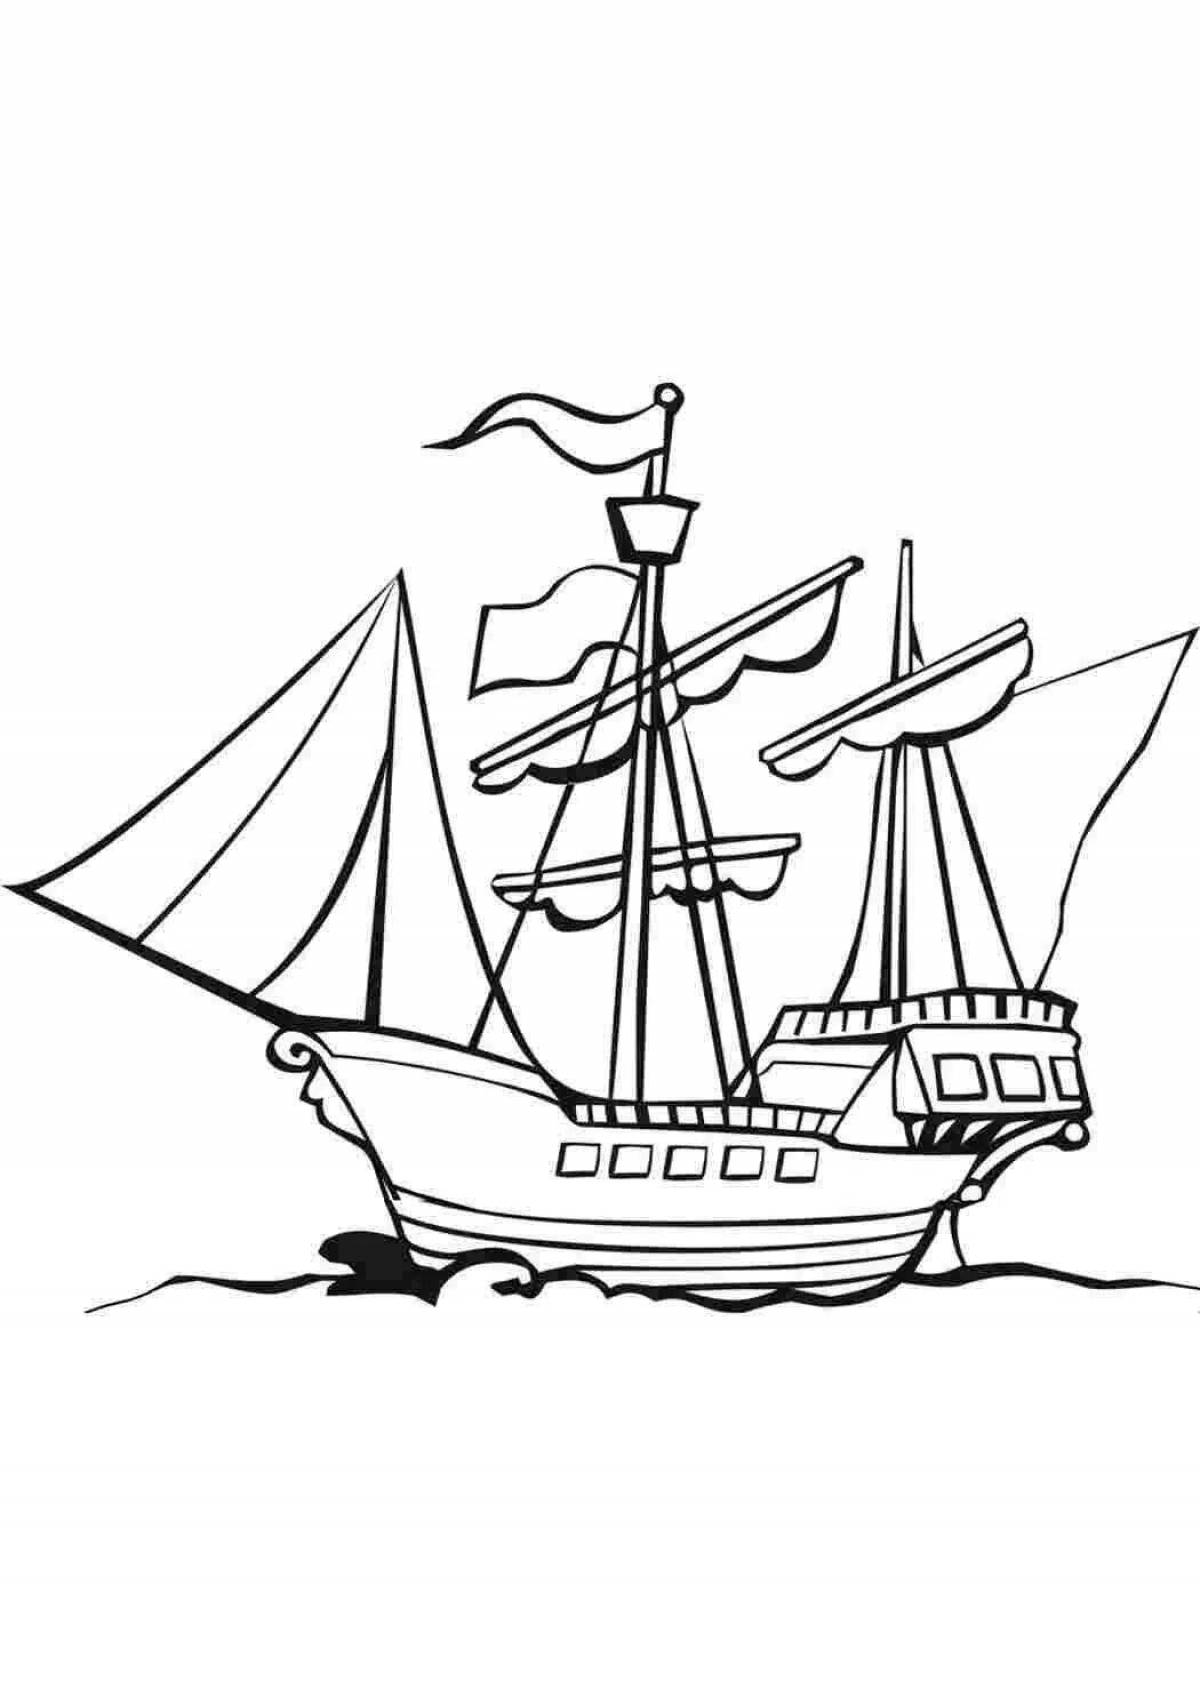 Fabulous ship coloring book for 7 year olds